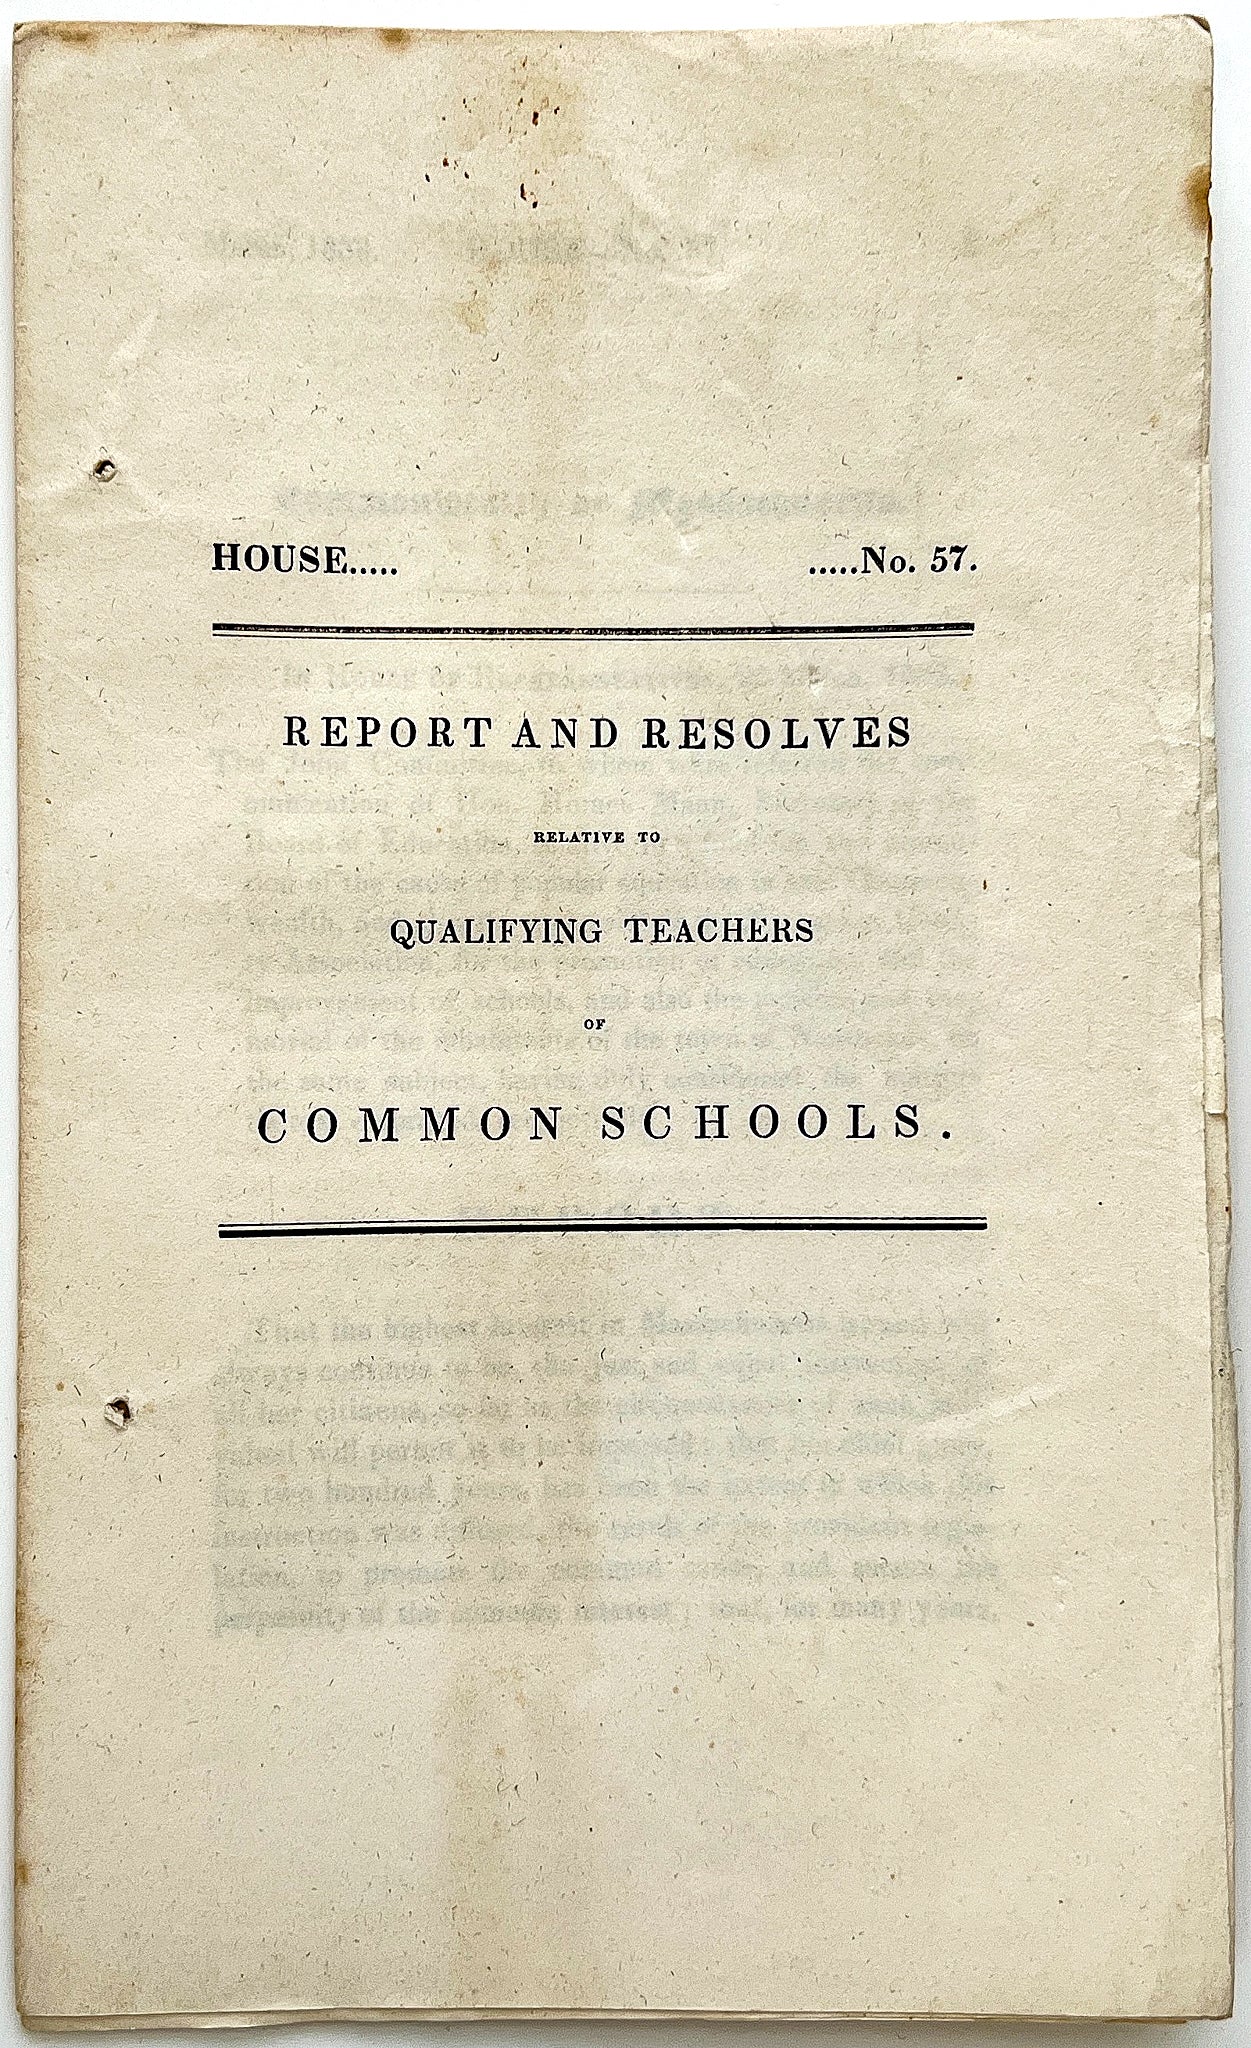 Report and Resolves Related to Qualifying Teachers of Common Schools (House No. 57, 22 March 1838)